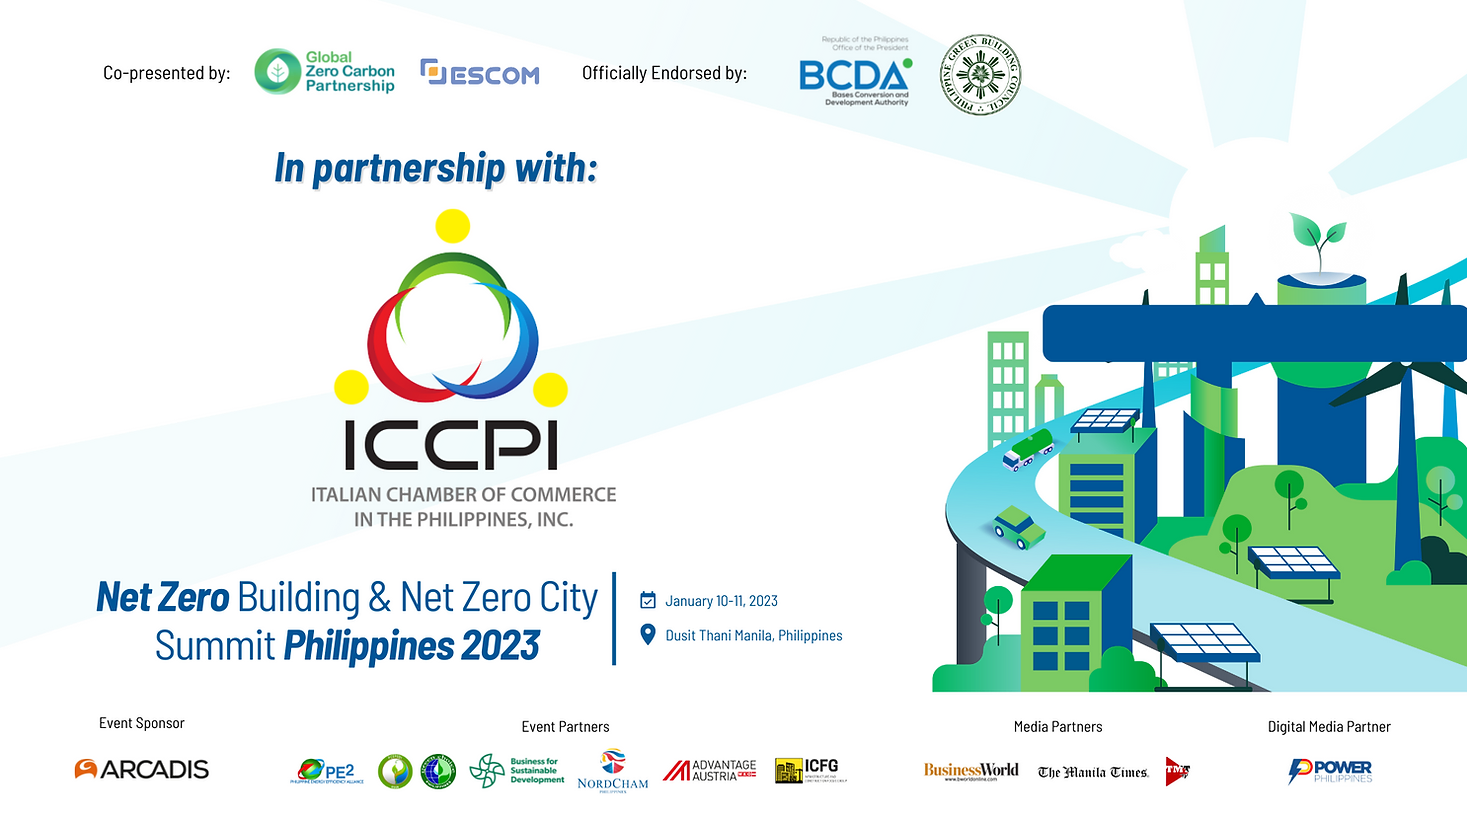 Italian Chamber of Commerce in the Philippines (ICCPI)